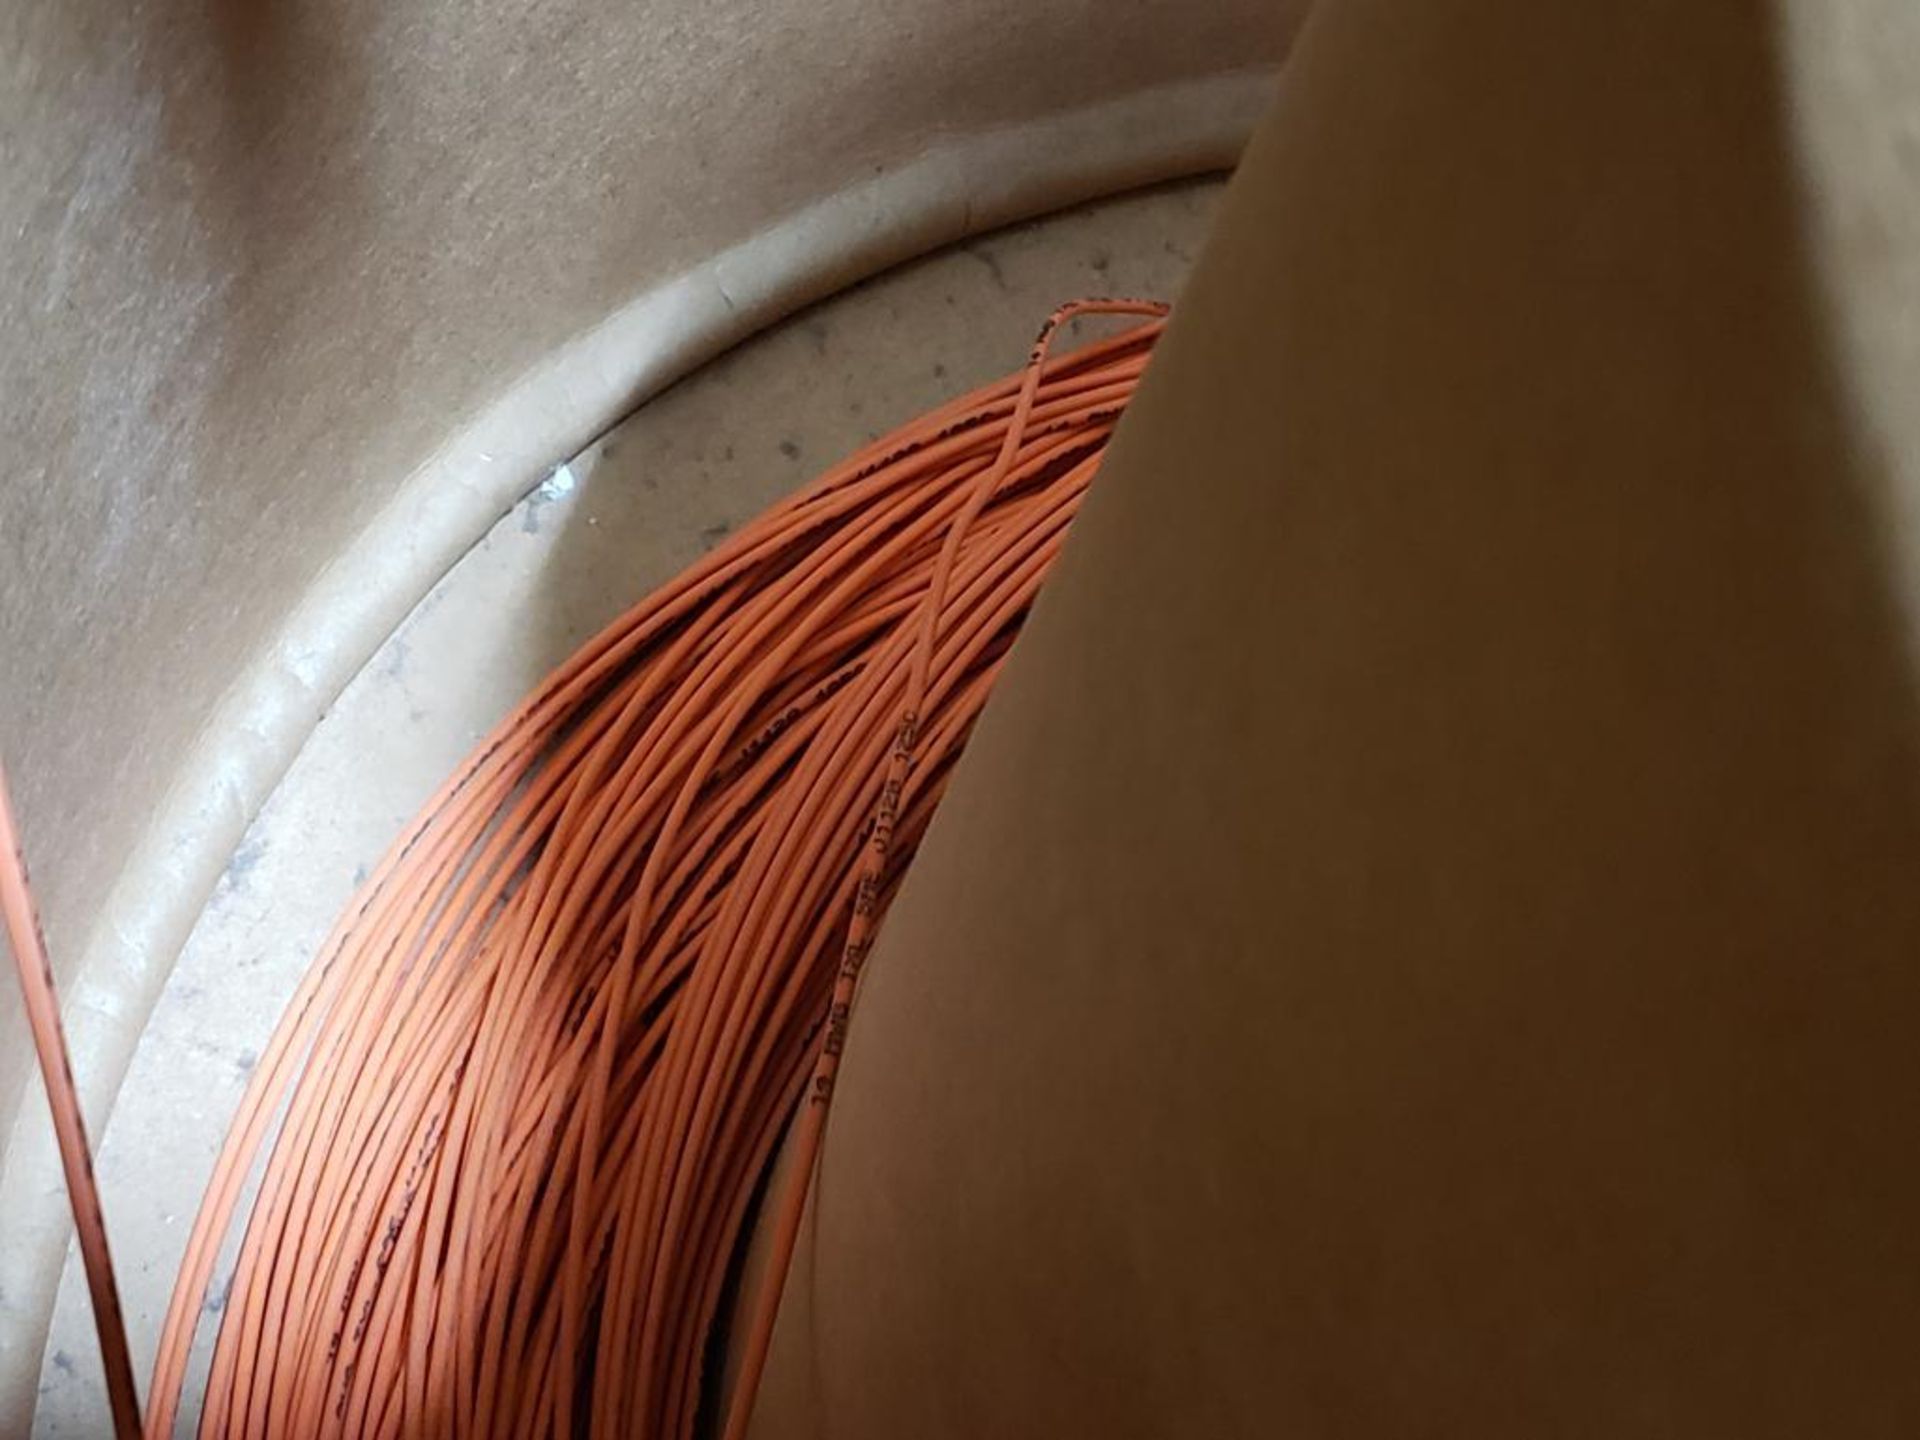 Qty 2 - Barrels 14 awg orange and 16 awg blue /white print copper wire. Gross barrel weight, 92lbs. - Image 2 of 9